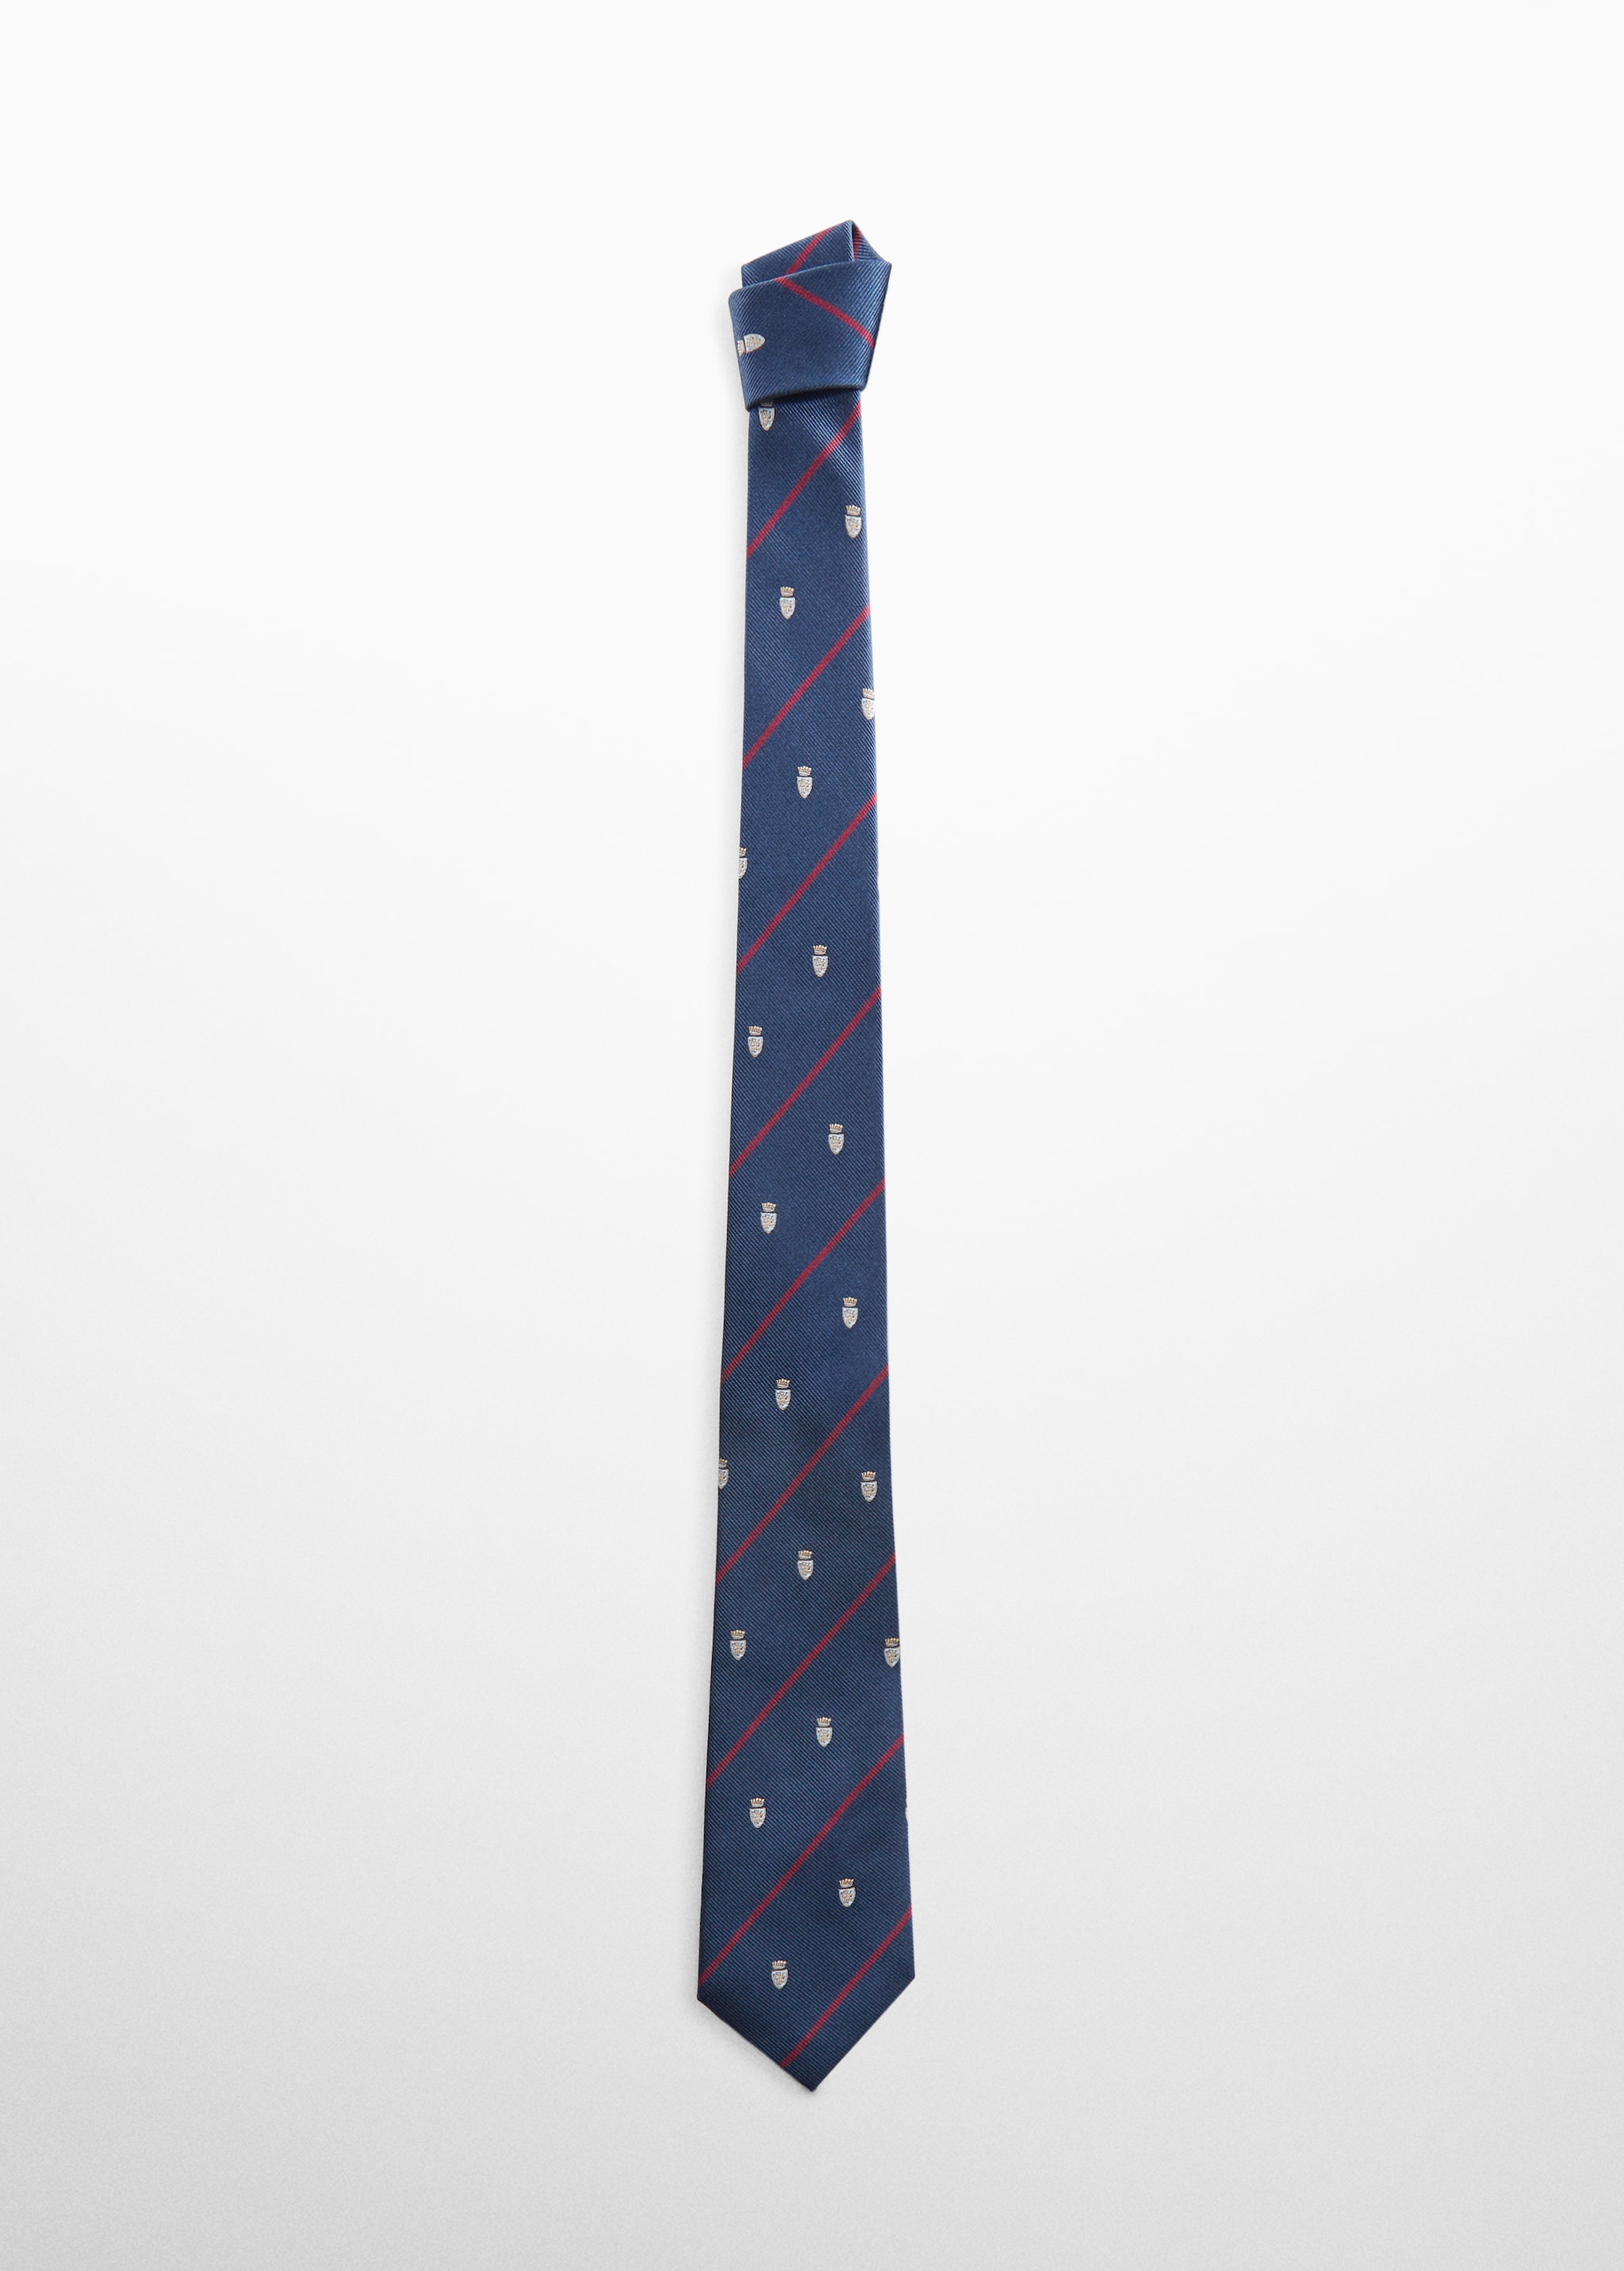 Printed tie - Article without model